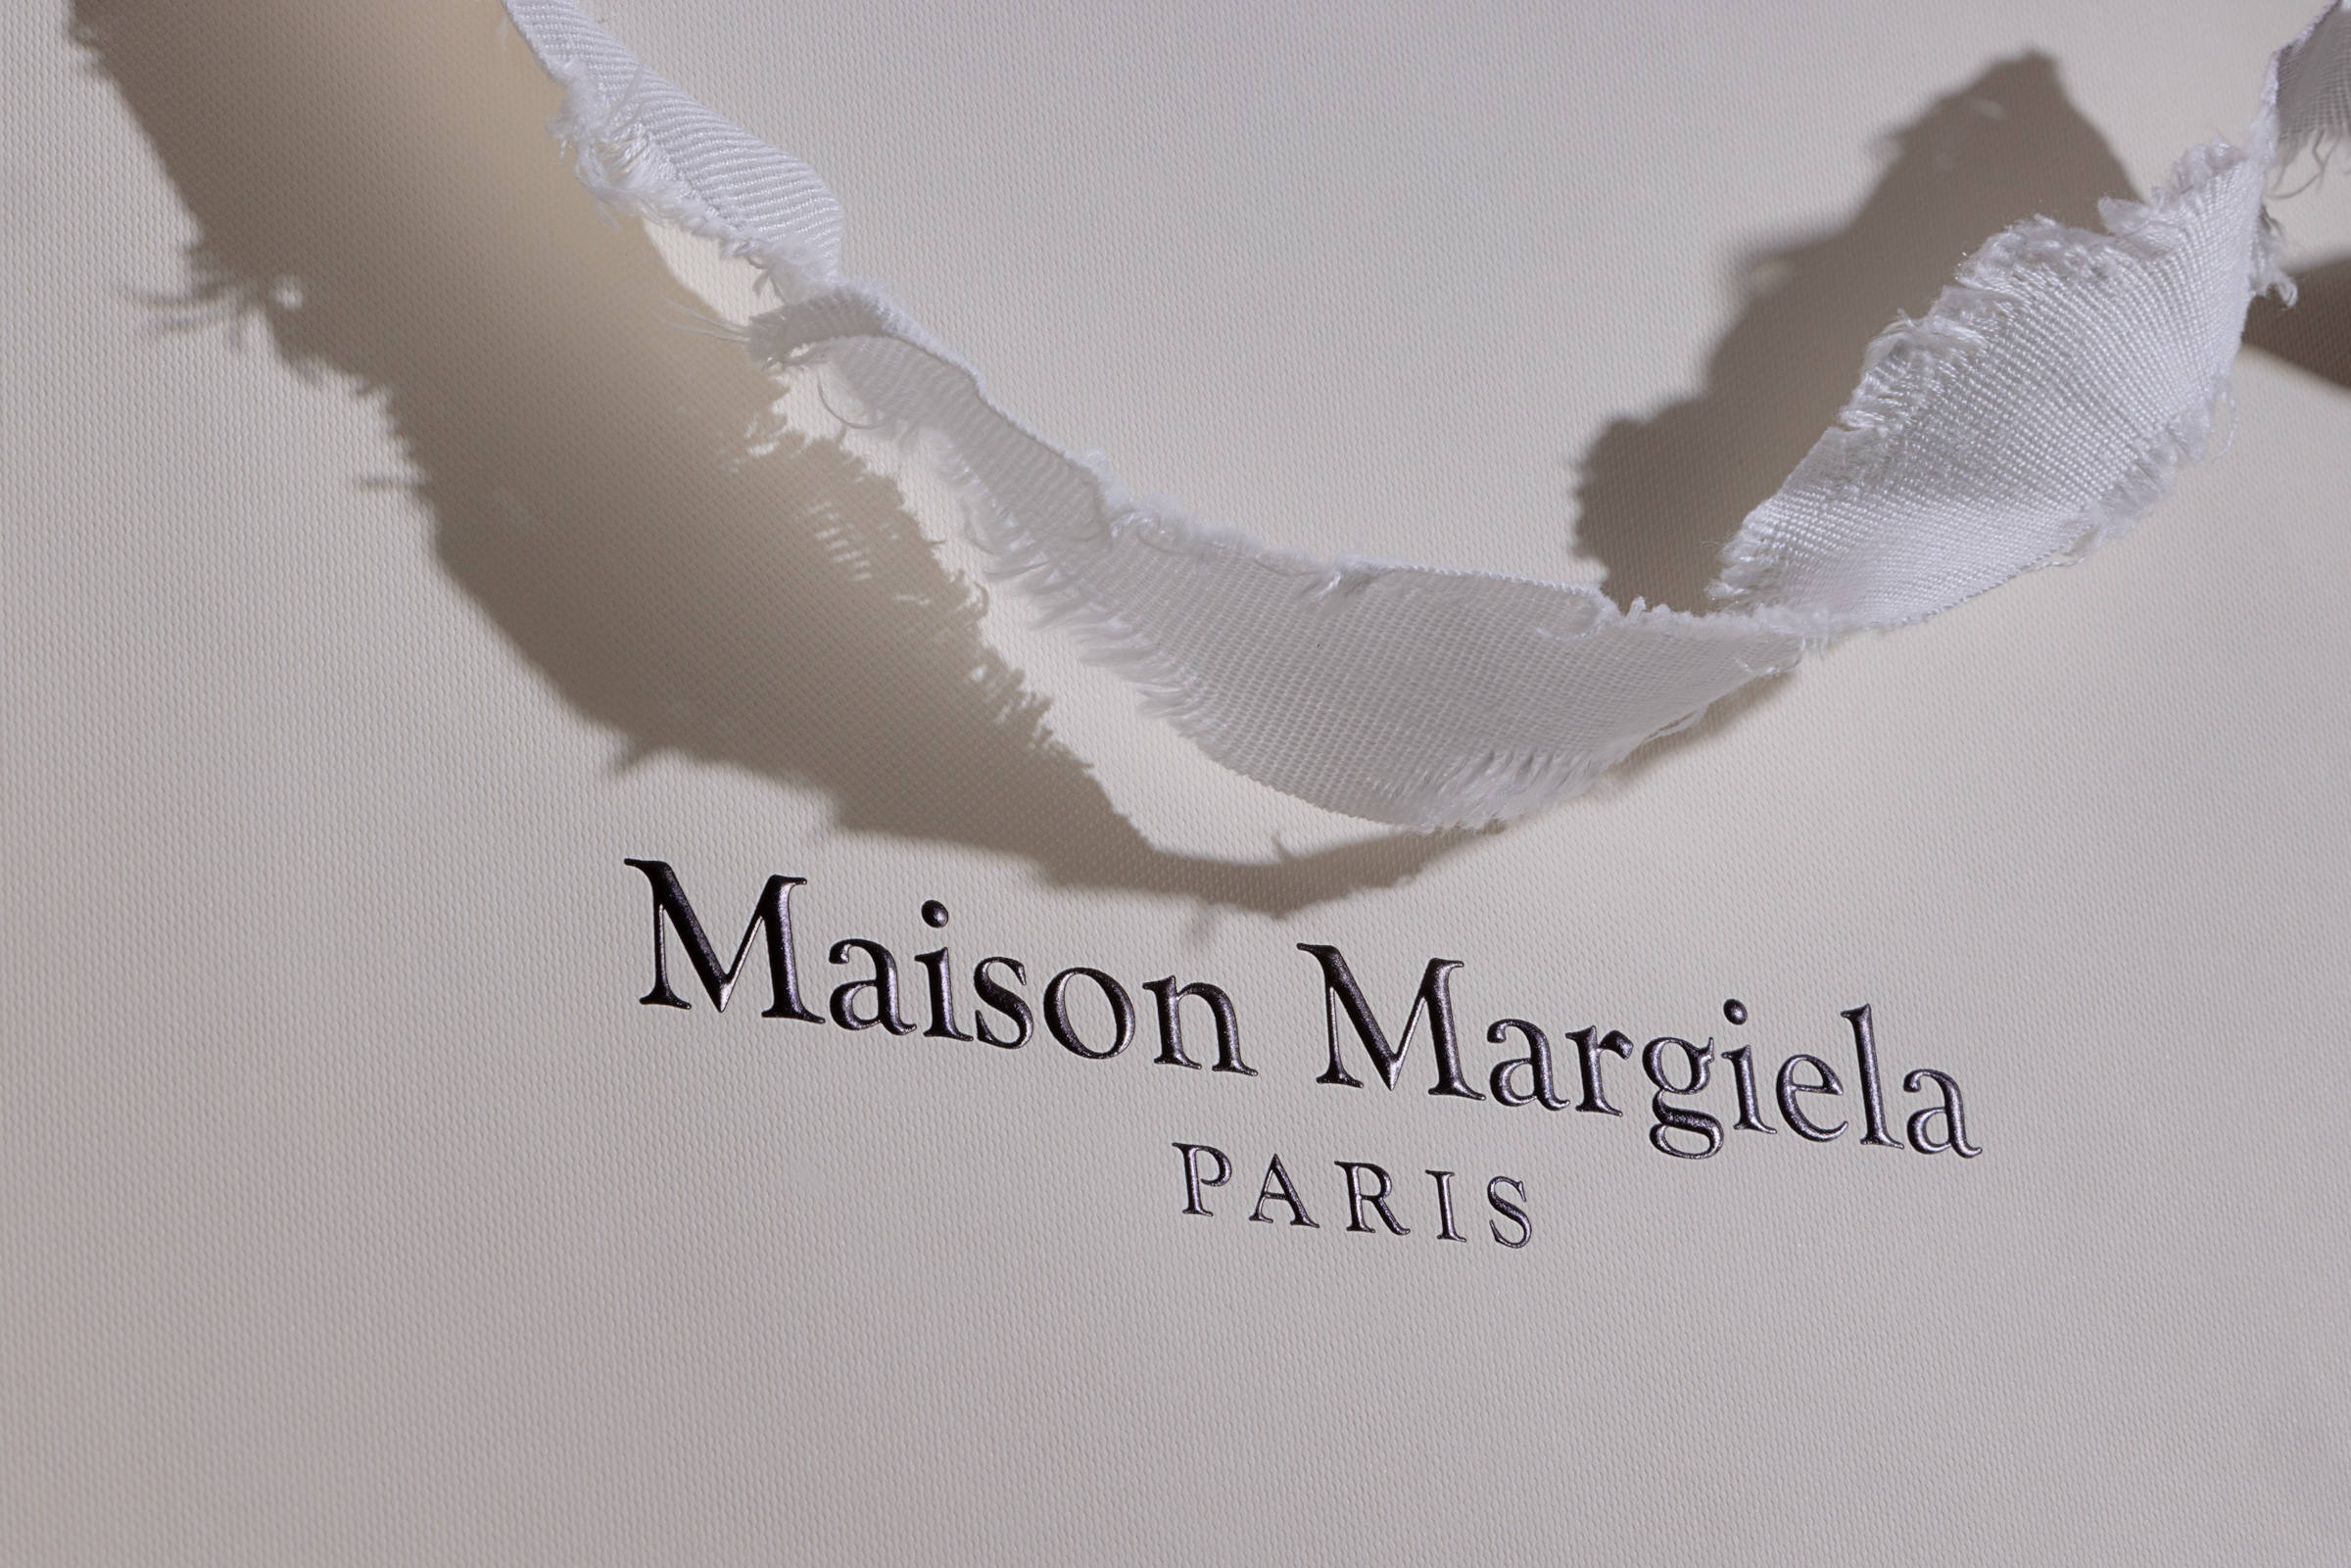 Luxury retail packaging Maison Margiela torn handles Recyclable Packaging Idpdirect.com sustainable Manufacturing